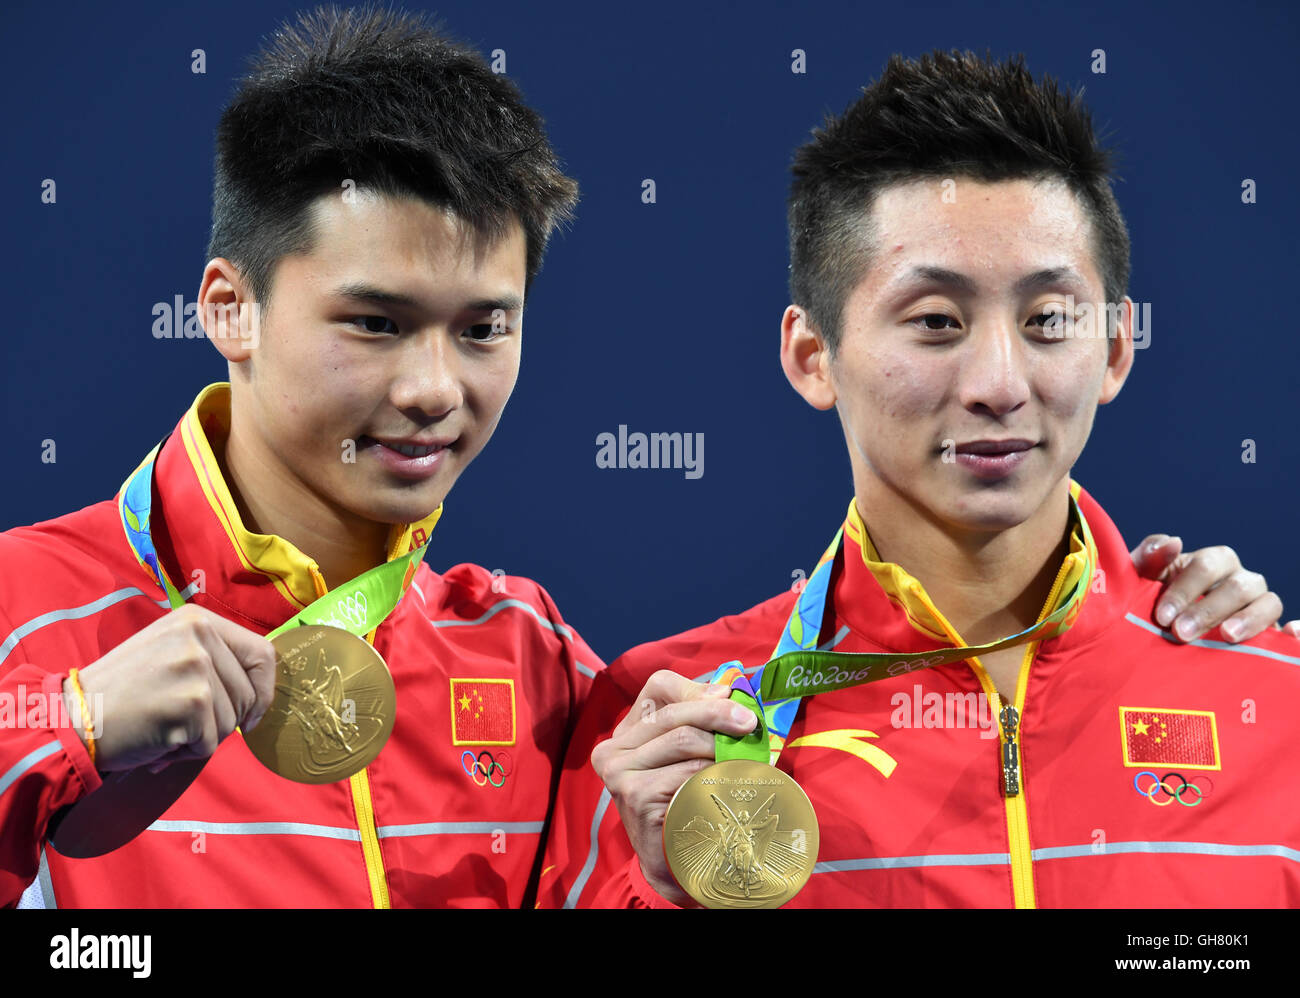 Rio de Janeiro, Brazil. 08th Aug, 2016. Chen Aisen (L) and Lin Yue (R) of China pose with their gold medals on the podium after winning the Men's Synchronised 10m Platform Final Swimming event of the Rio 2016 Olympic Games at the Olympic Aquatics Stadium, Rio de Janeiro, Brazil, 8 August 2016. Credit:  dpa picture alliance/Alamy Live News Stock Photo